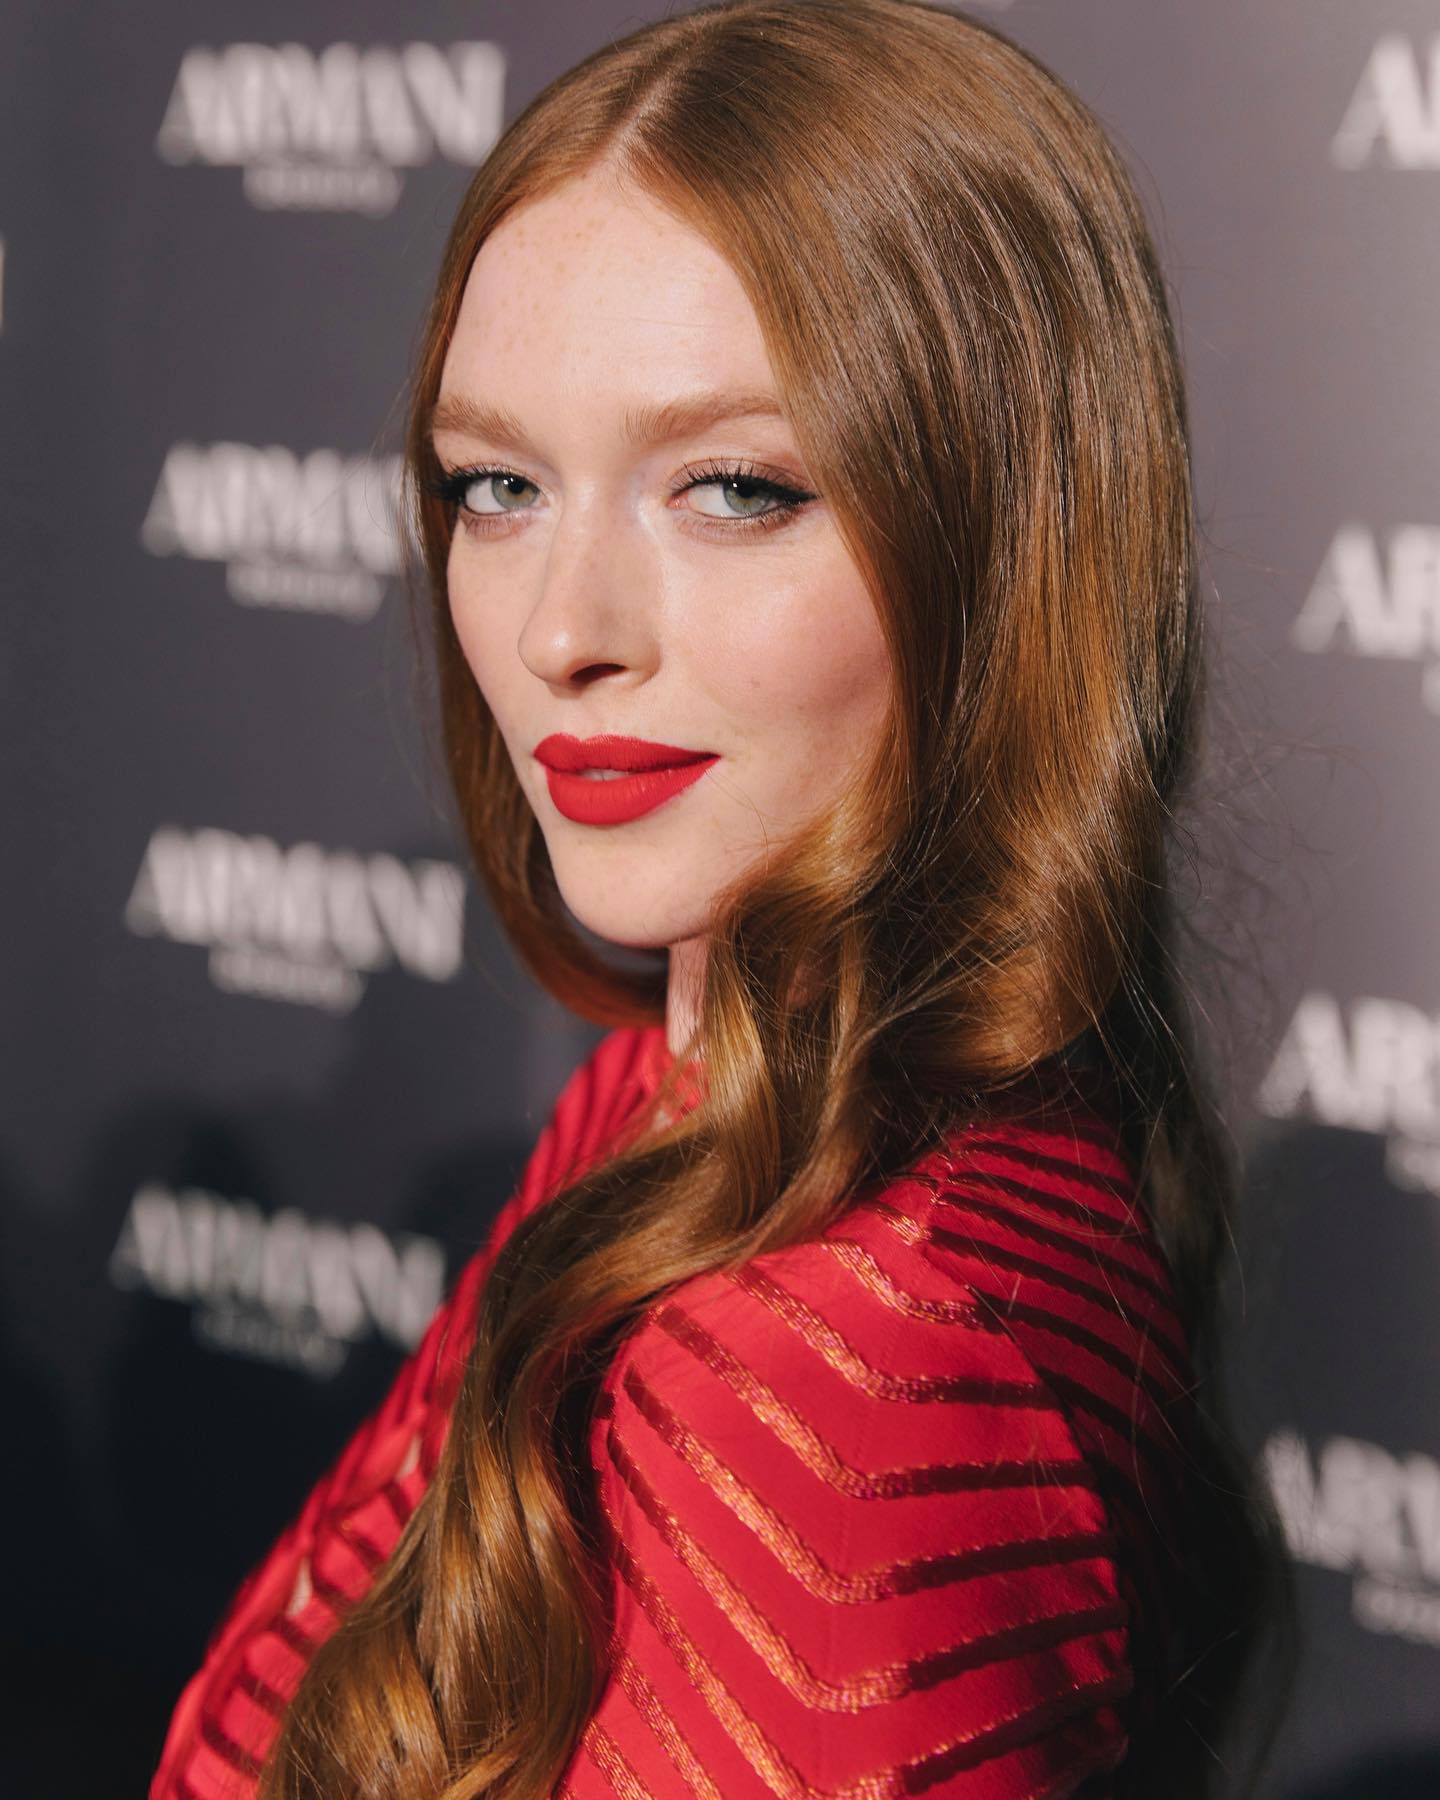 Larsen Thompson seen in Red and Black Outfit in Armani beauty Night, May 2022